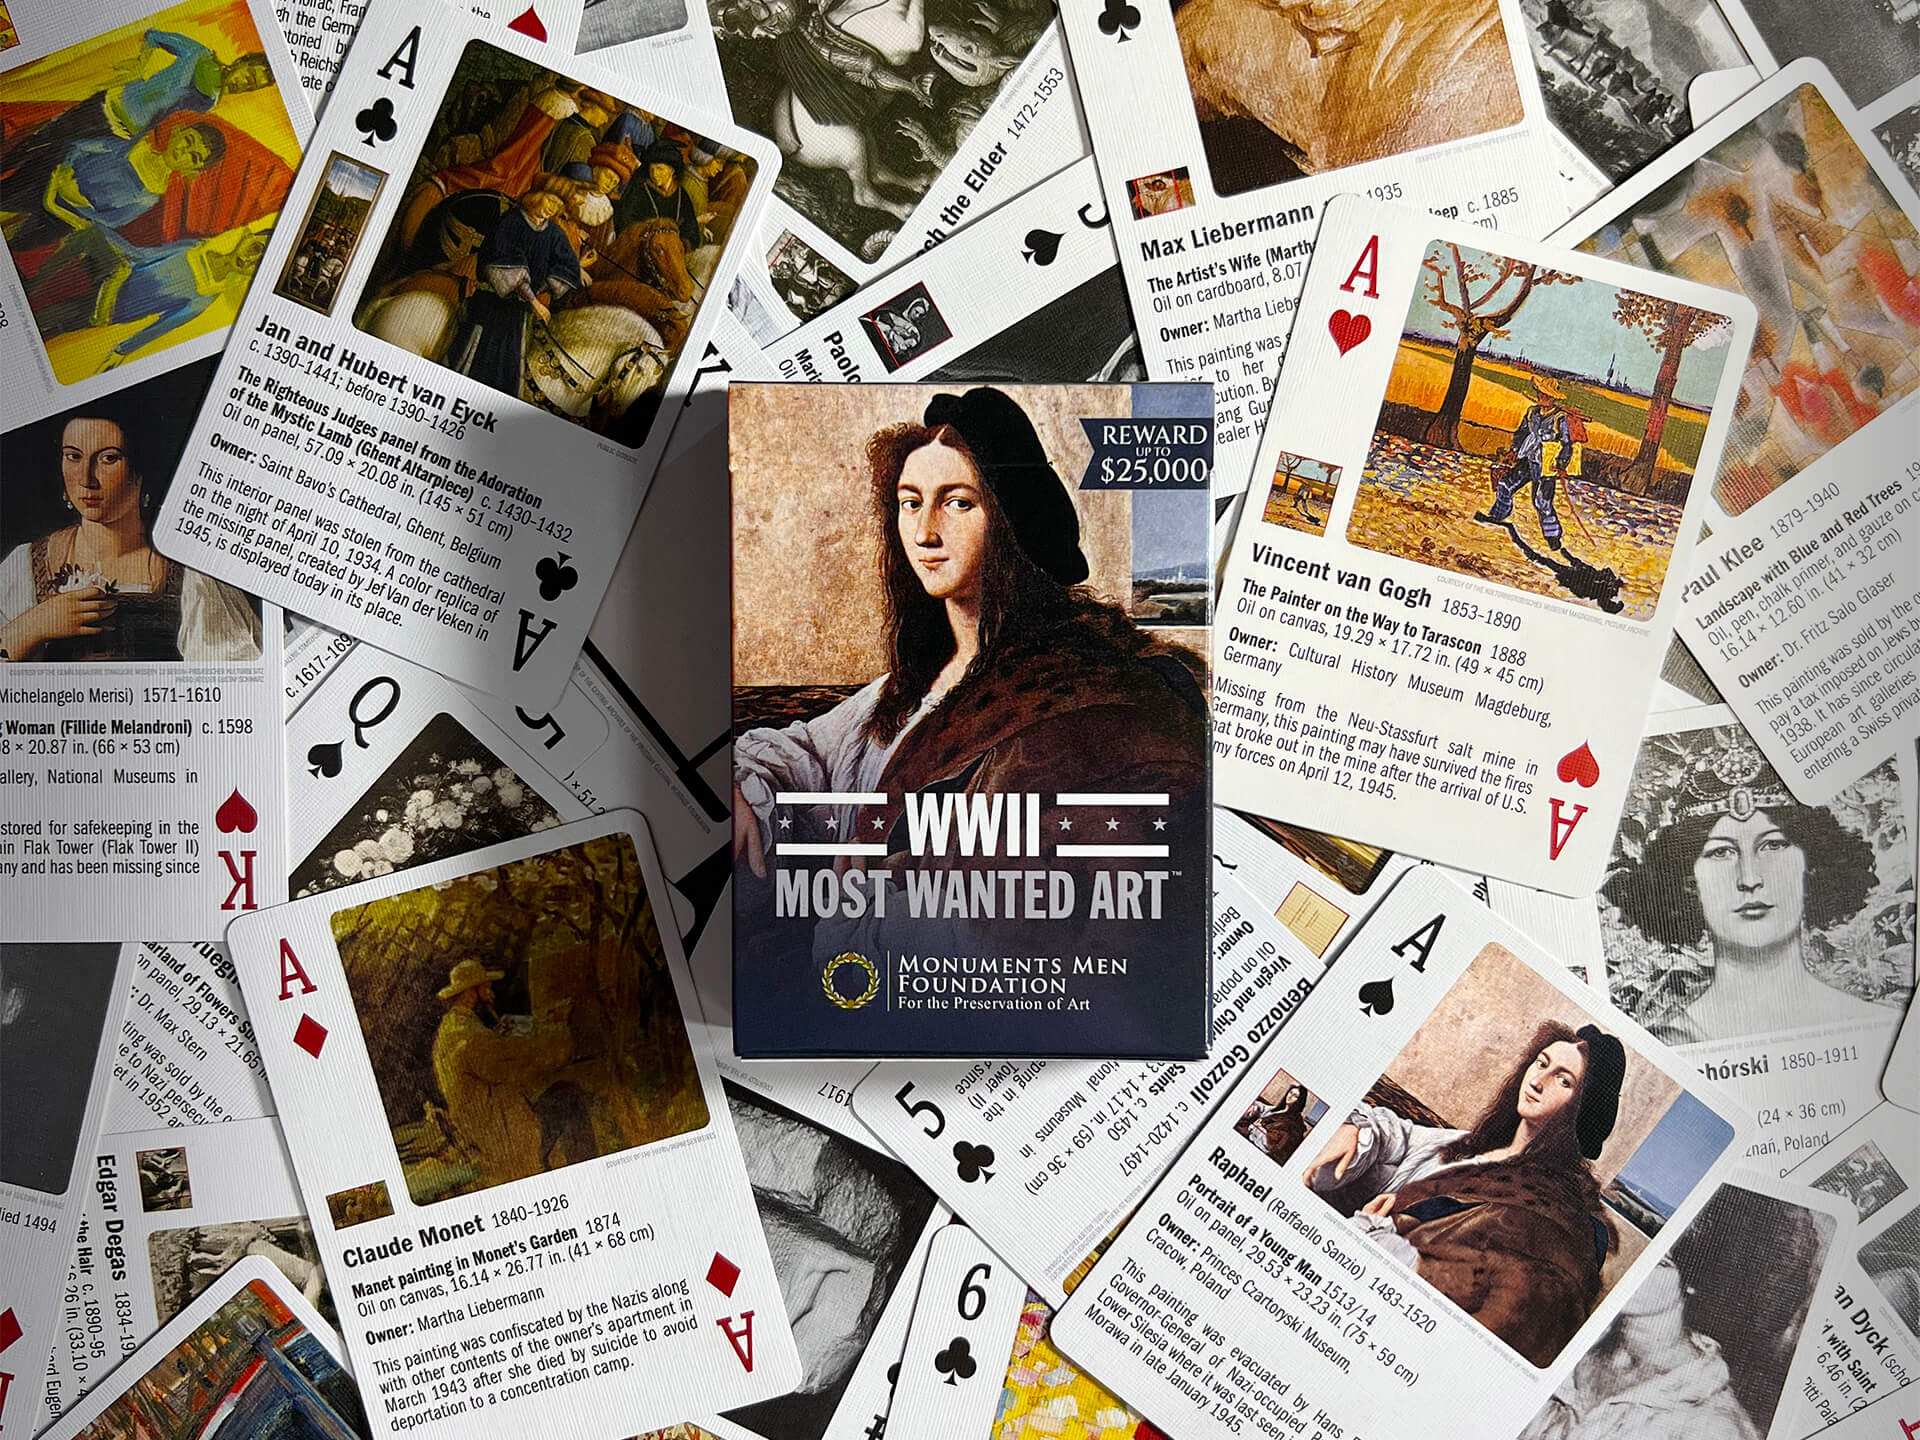 WWII Most Wanted Art™ playing cards by the Monuments Men Foundation